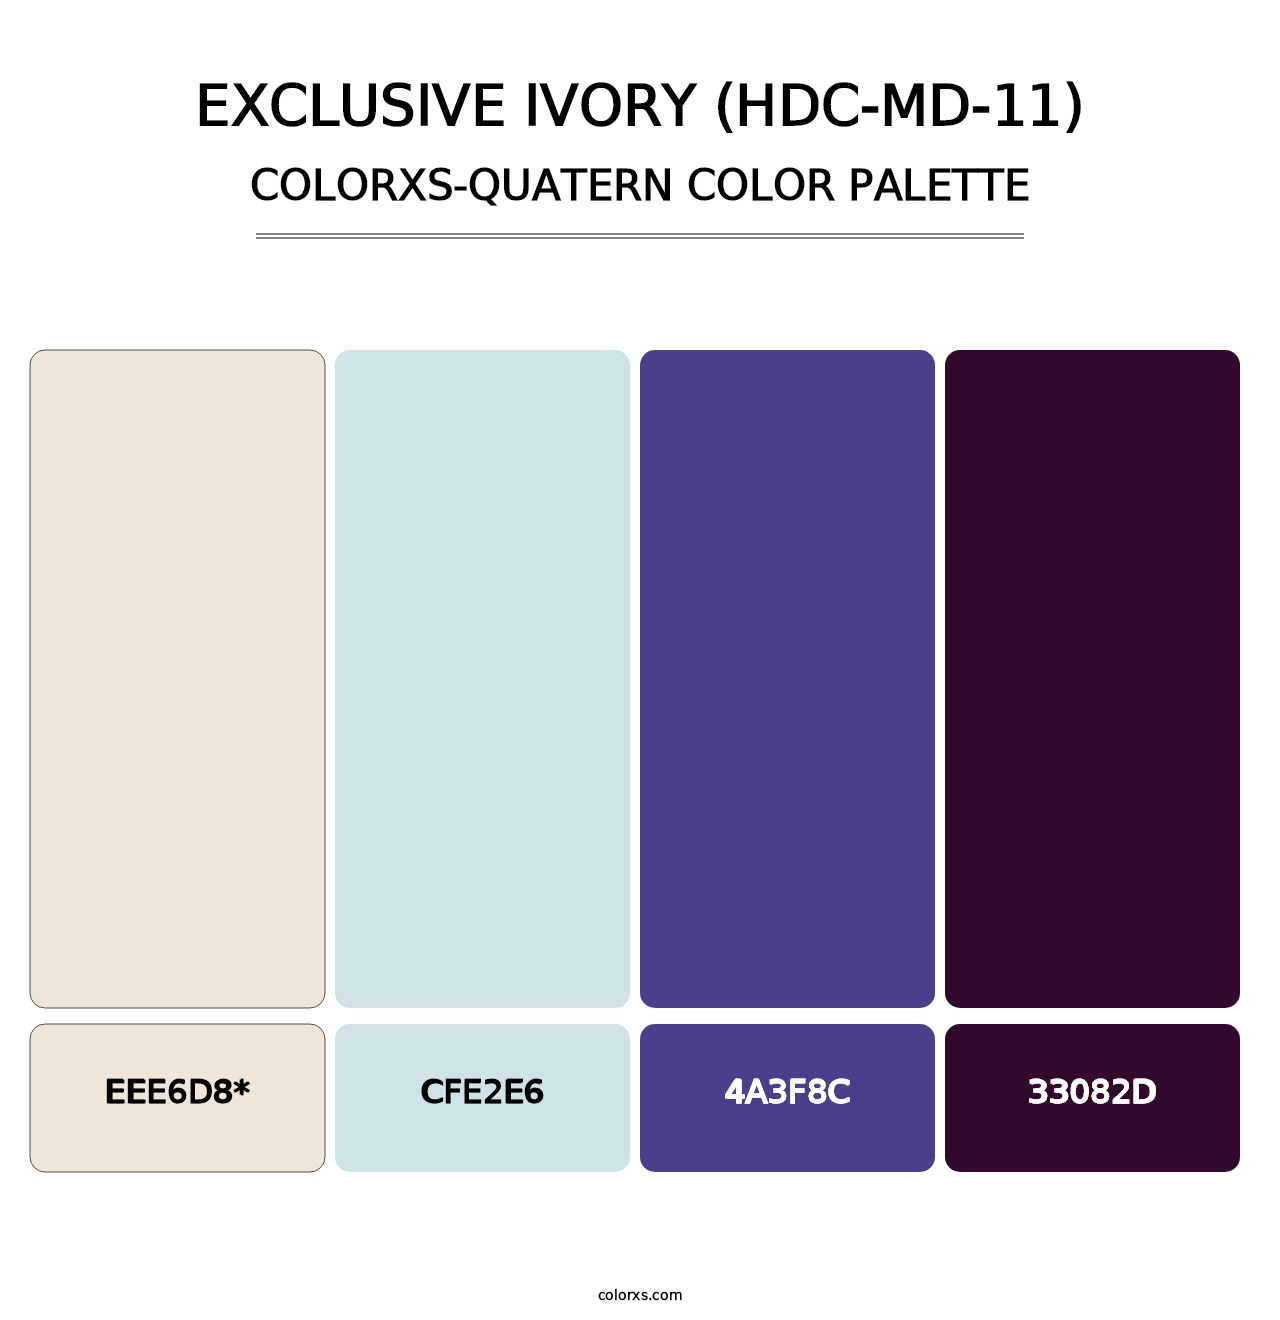 Exclusive Ivory (HDC-MD-11) - Colorxs Quatern Palette